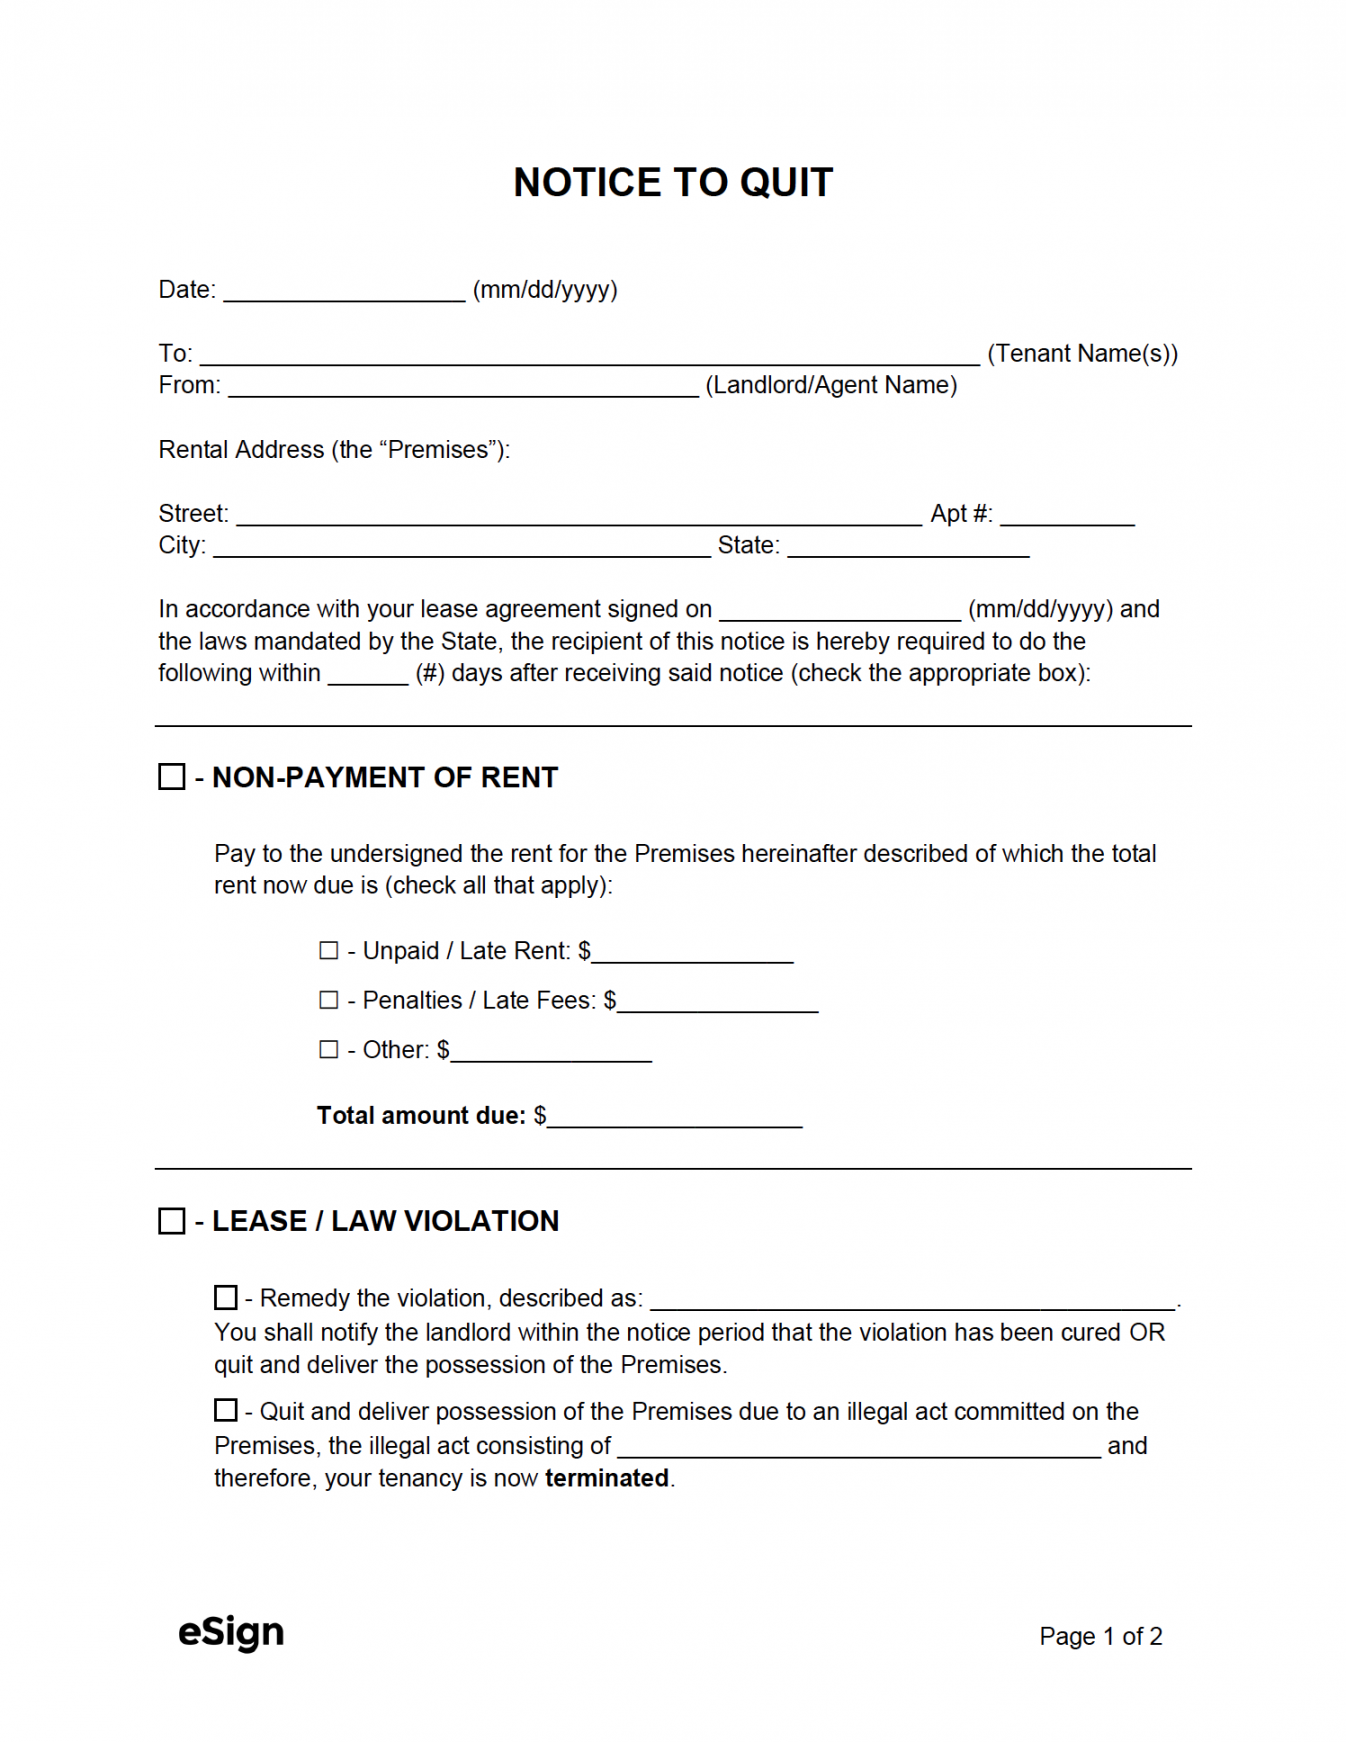 Free Printable Eviction Notice - Printable - Free Eviction Notice Templates ( types)  PDF  Word